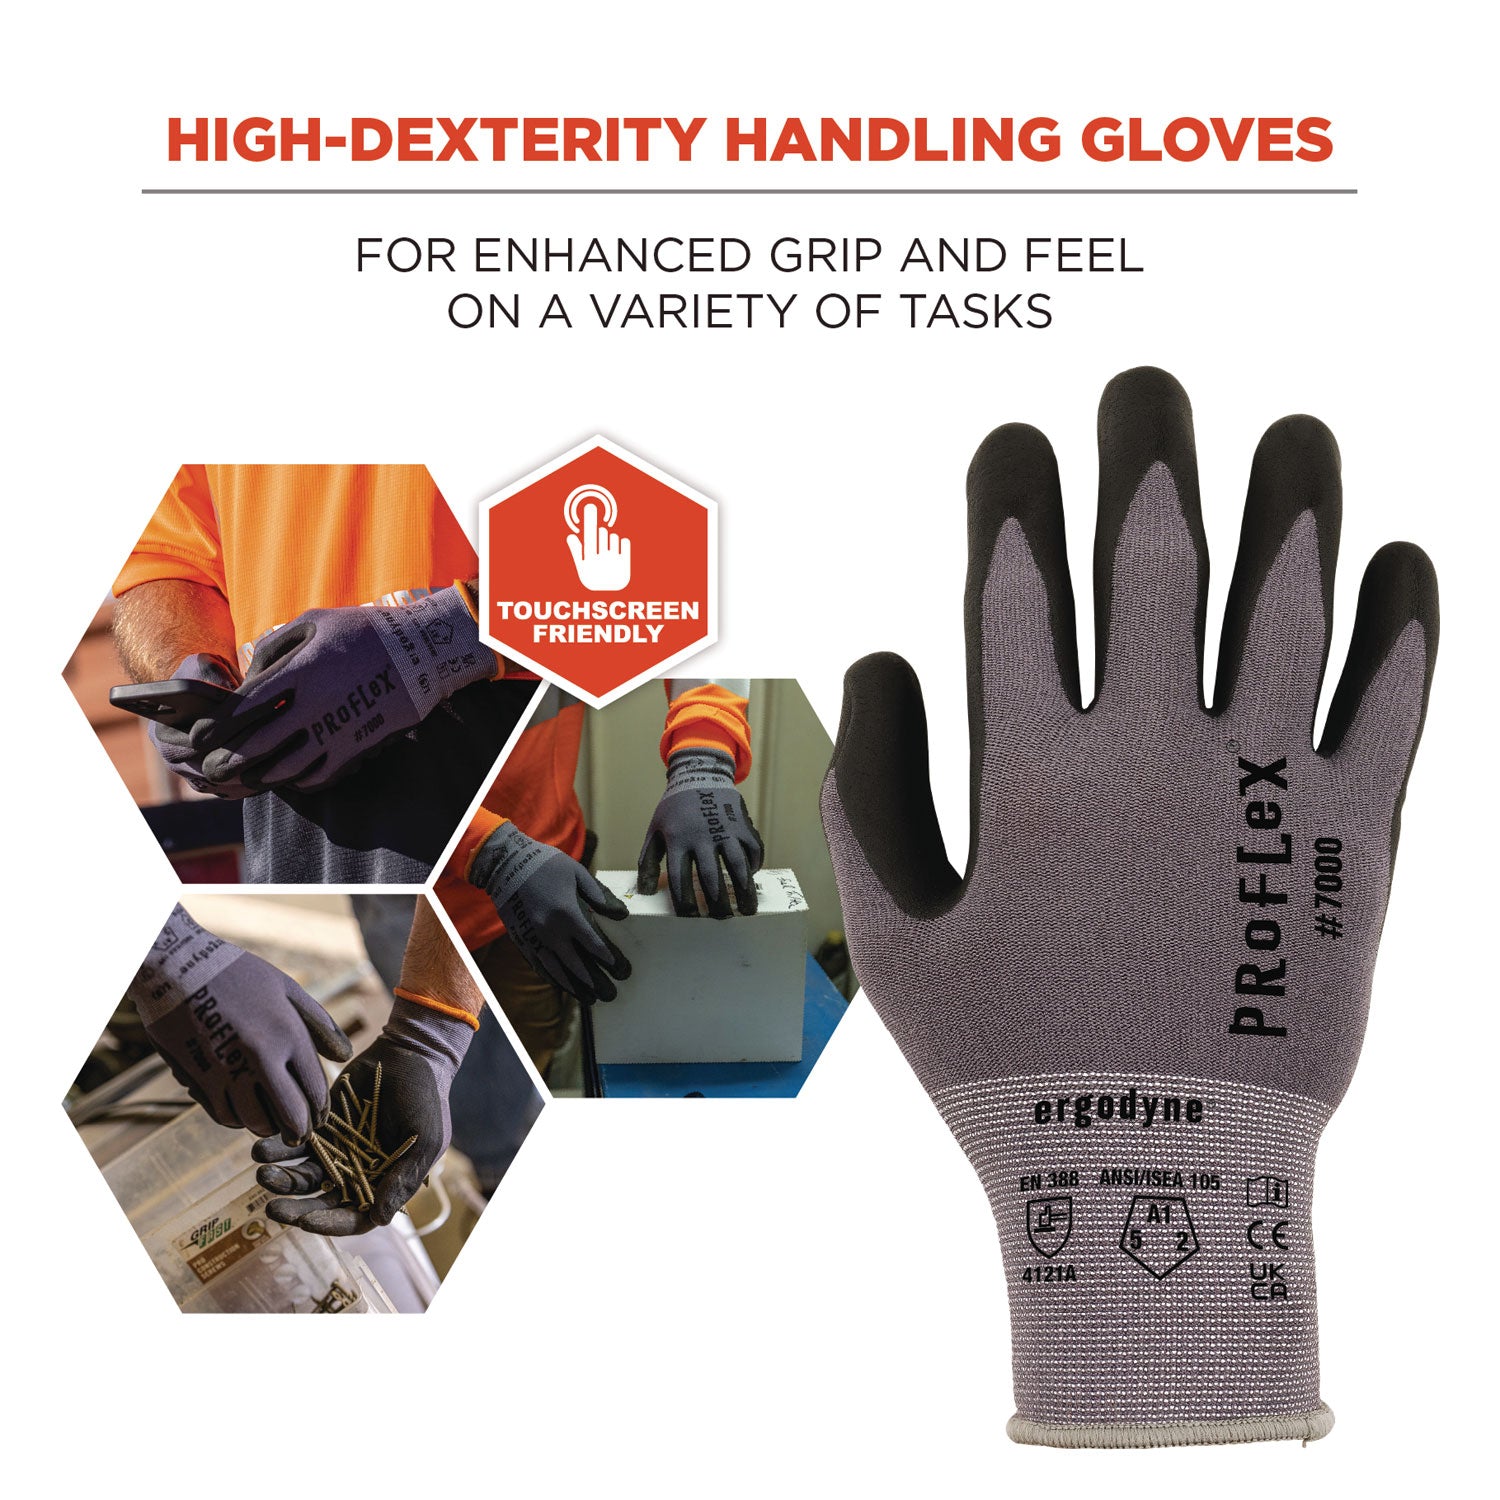 proflex-7000-nitrile-coated-gloves-microfoam-palm-gray-x-small-12-pairs-pack-ships-in-1-3-business-days_ego10361 - 3